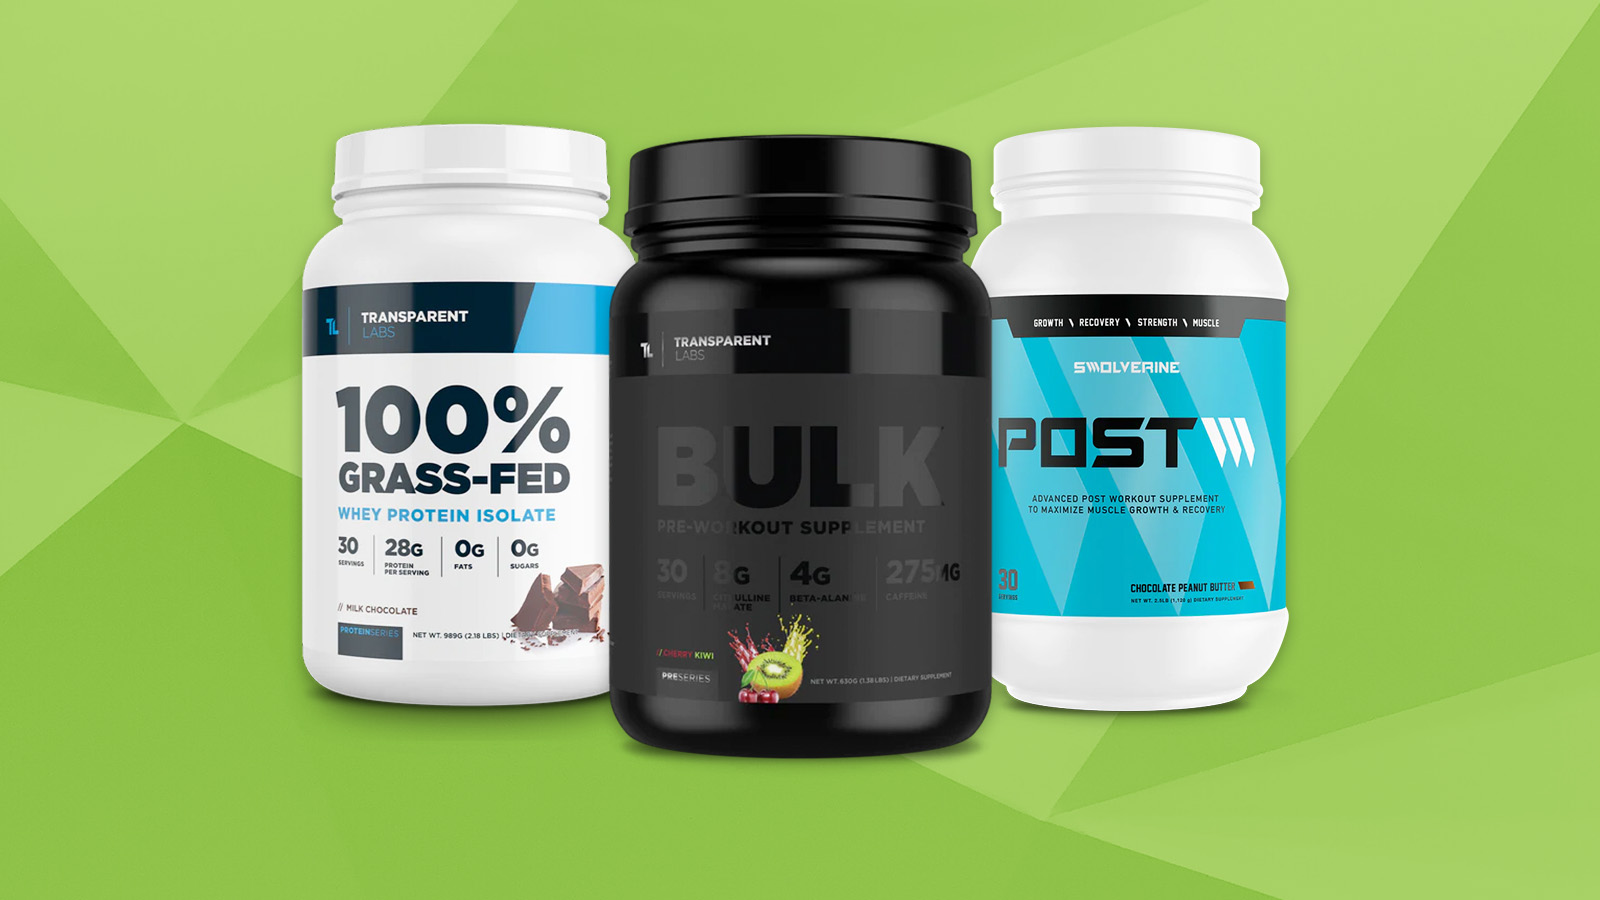 Supplements - Preworkouts, Protein, Muscle Builders, & More